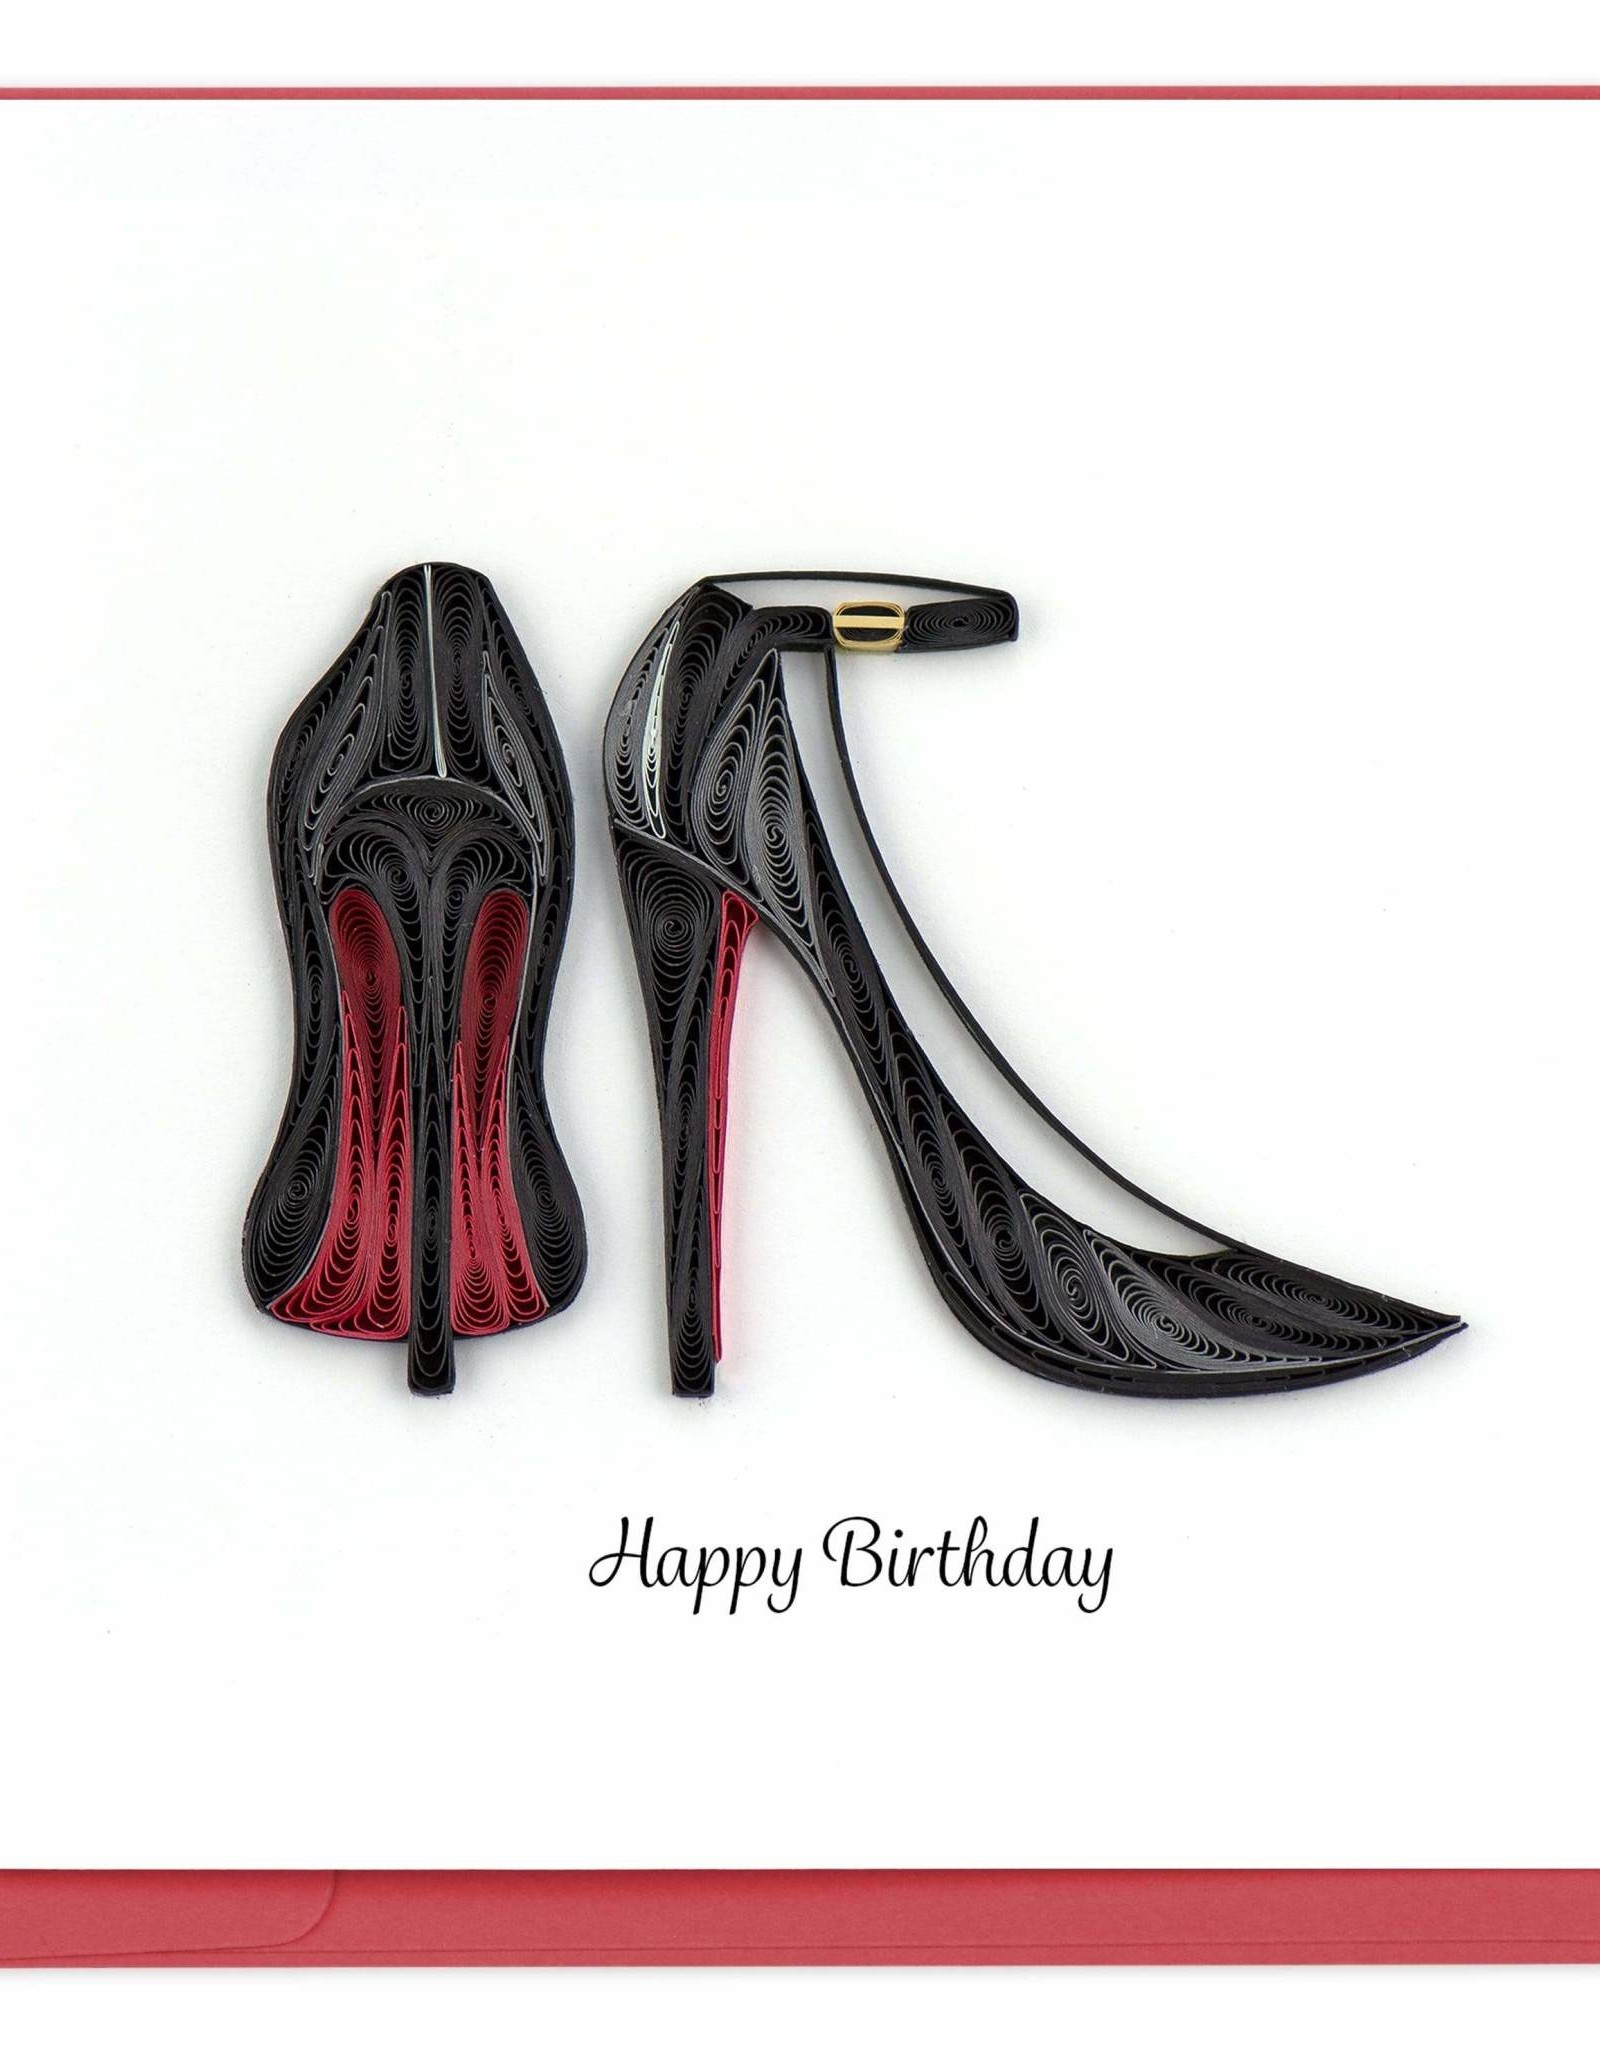 Quilling Card Quilled Red Bottom Heels Birthday Card